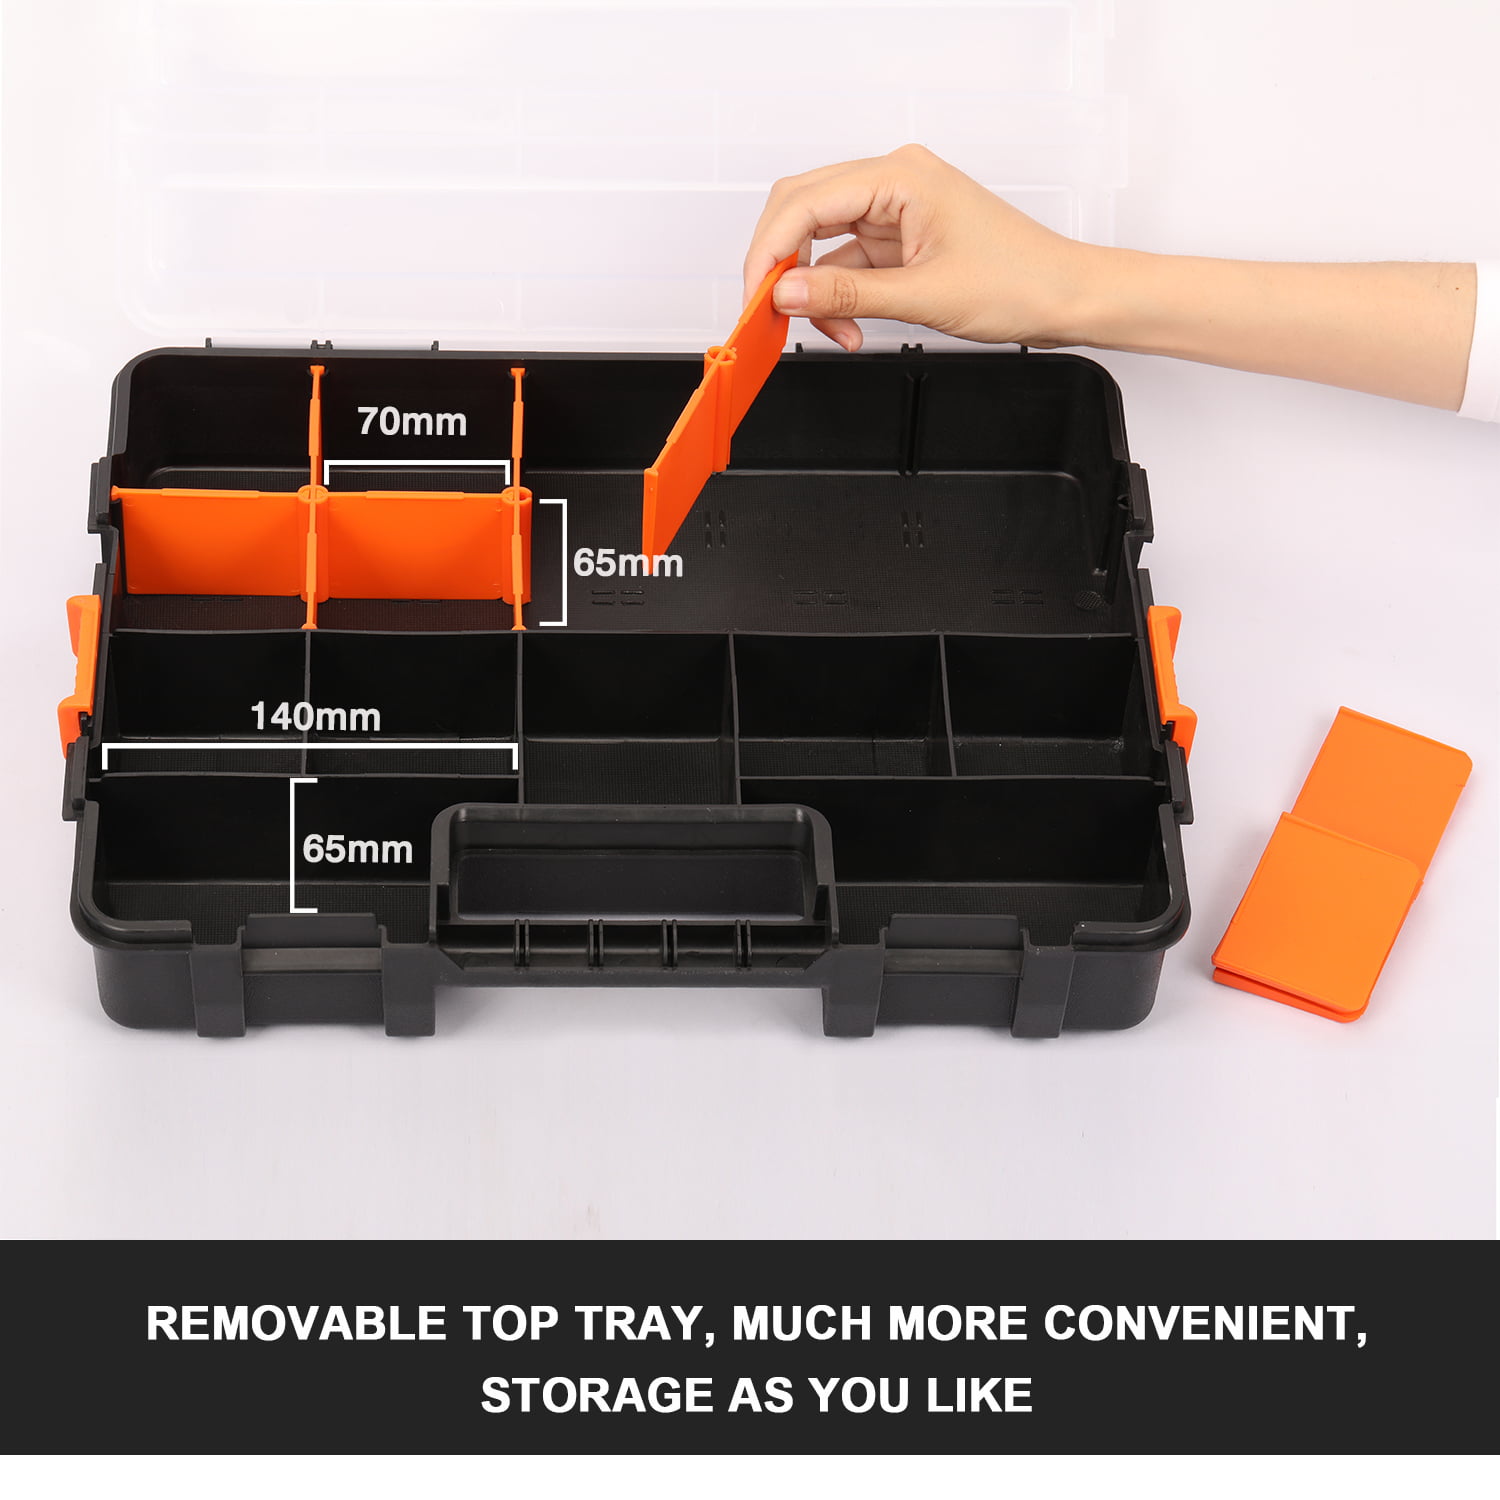 Inhemi Home Tool Part Storage Box, Small Parts Tool Box Organizer, Plastic Two-Layer Components Storage Case for Nails, Screws, and Bolts